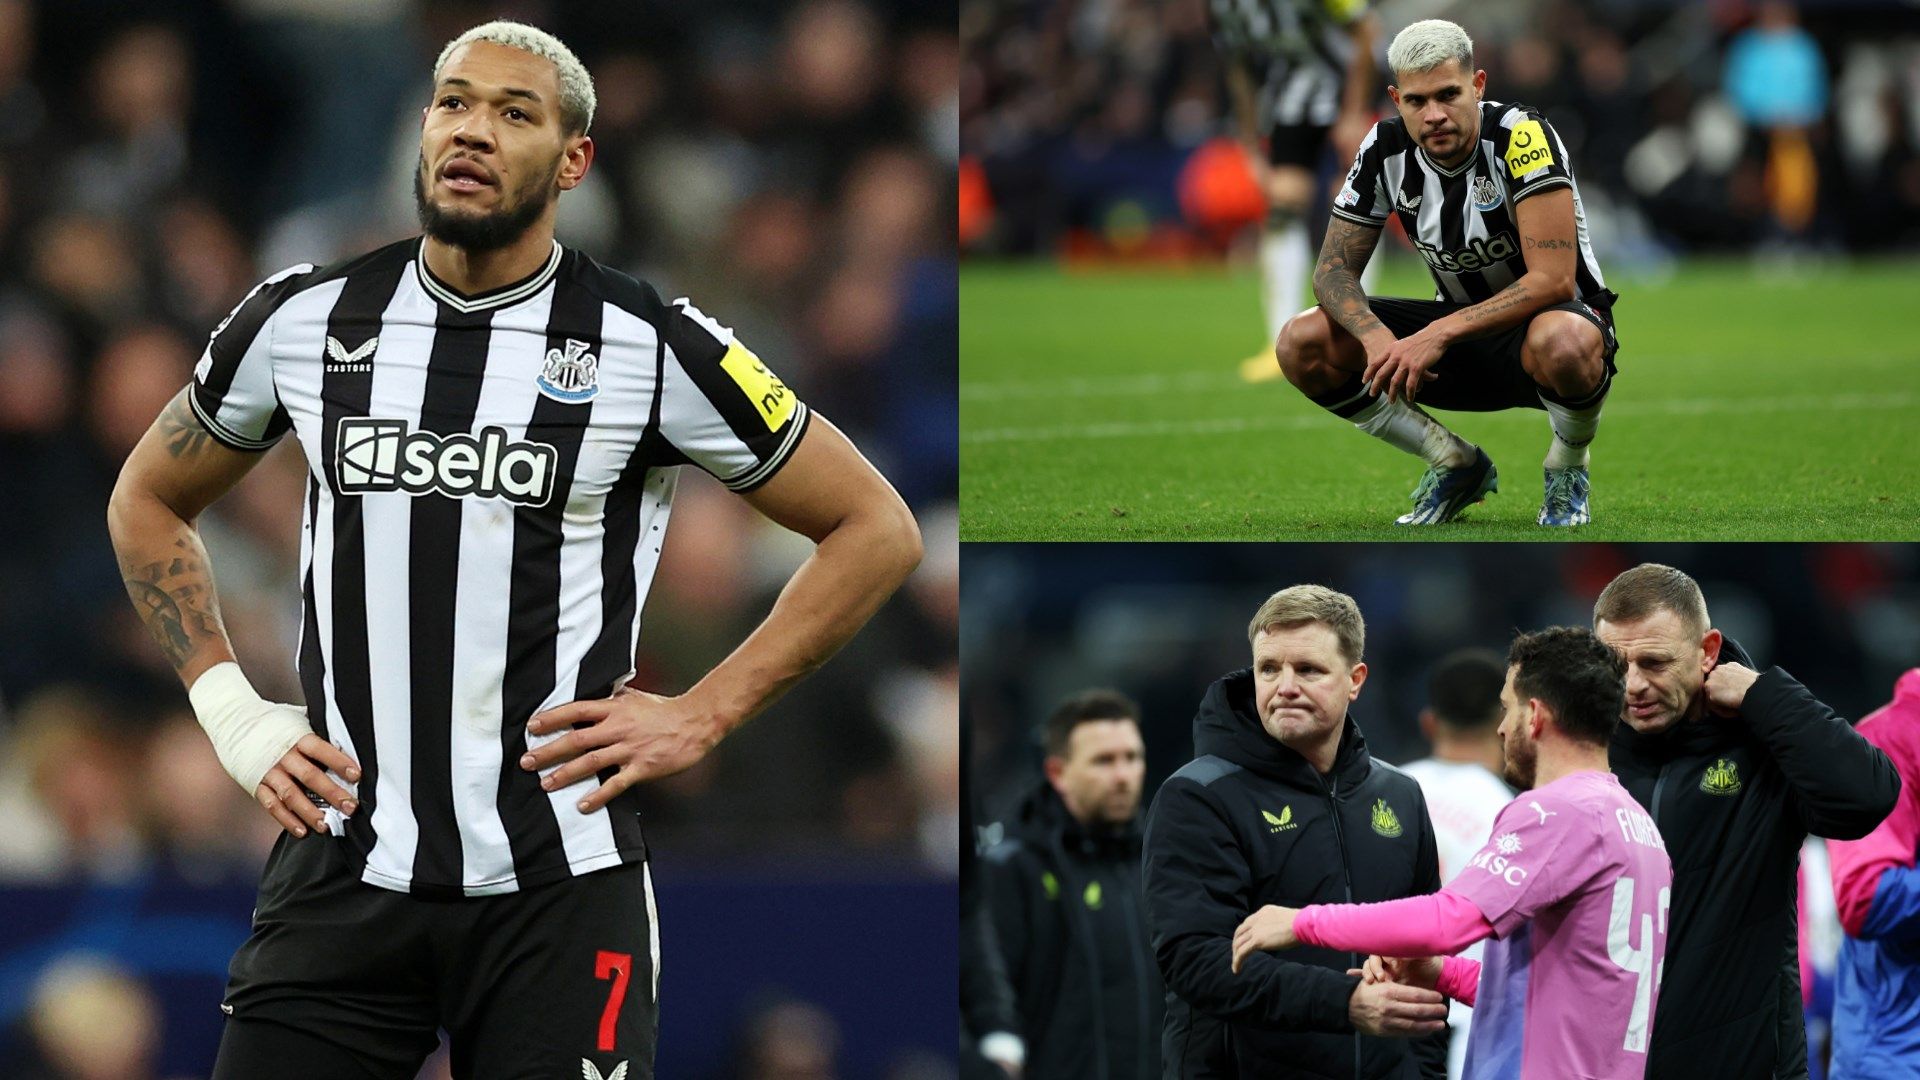 Ex-Newcastle United and Aston Villa star lined-up for shock role following major Will Still update - Speculations on how they could contribute to the team